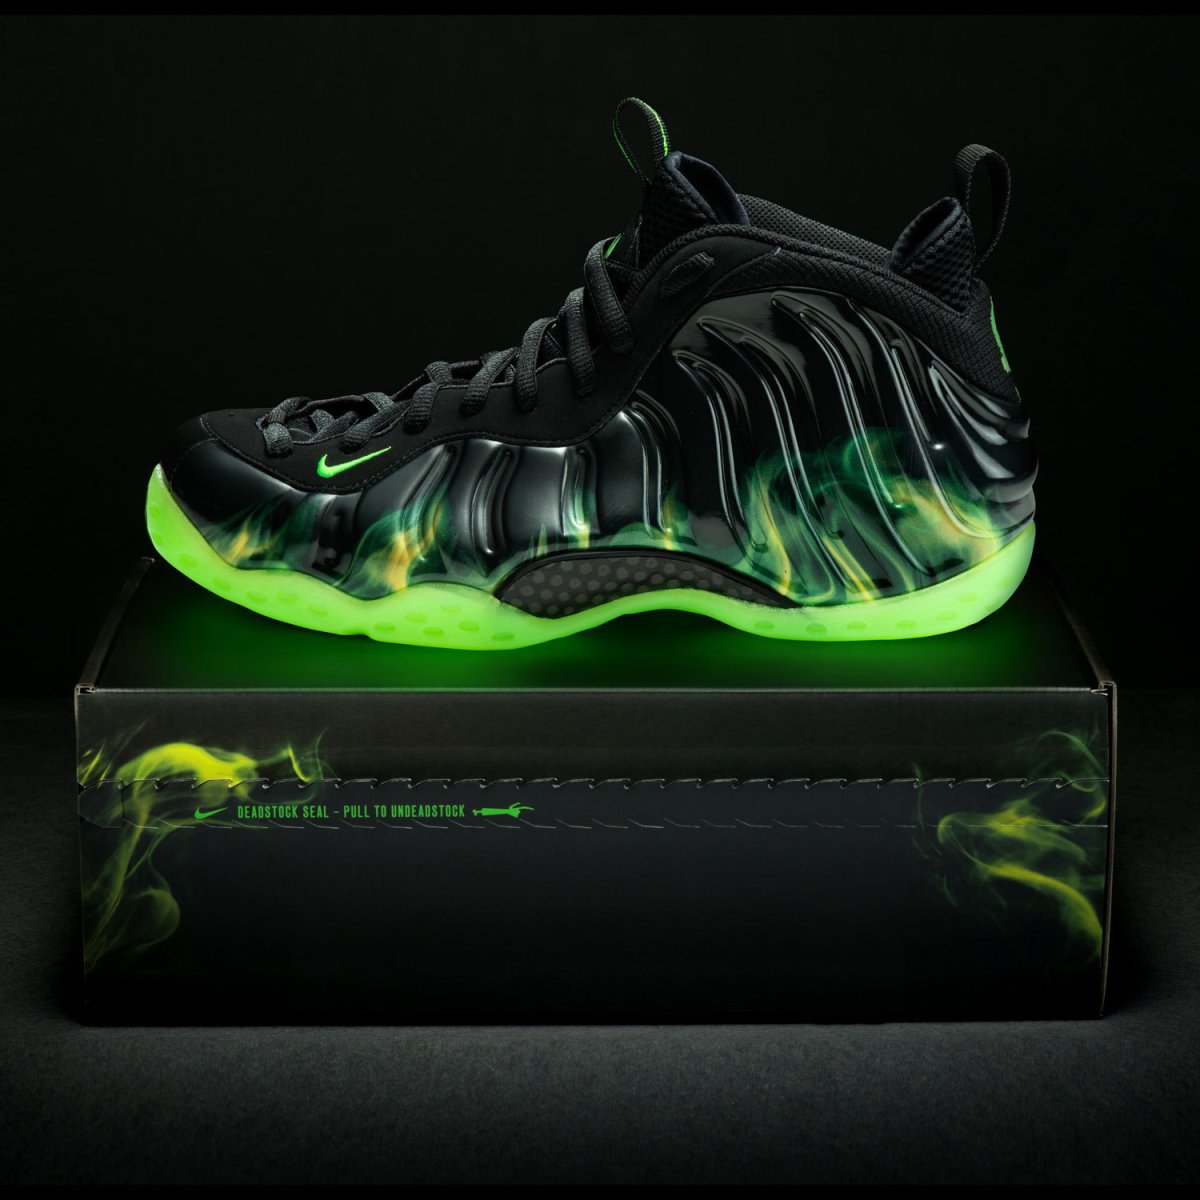 Nike Air Foamposite one PARANORMAN